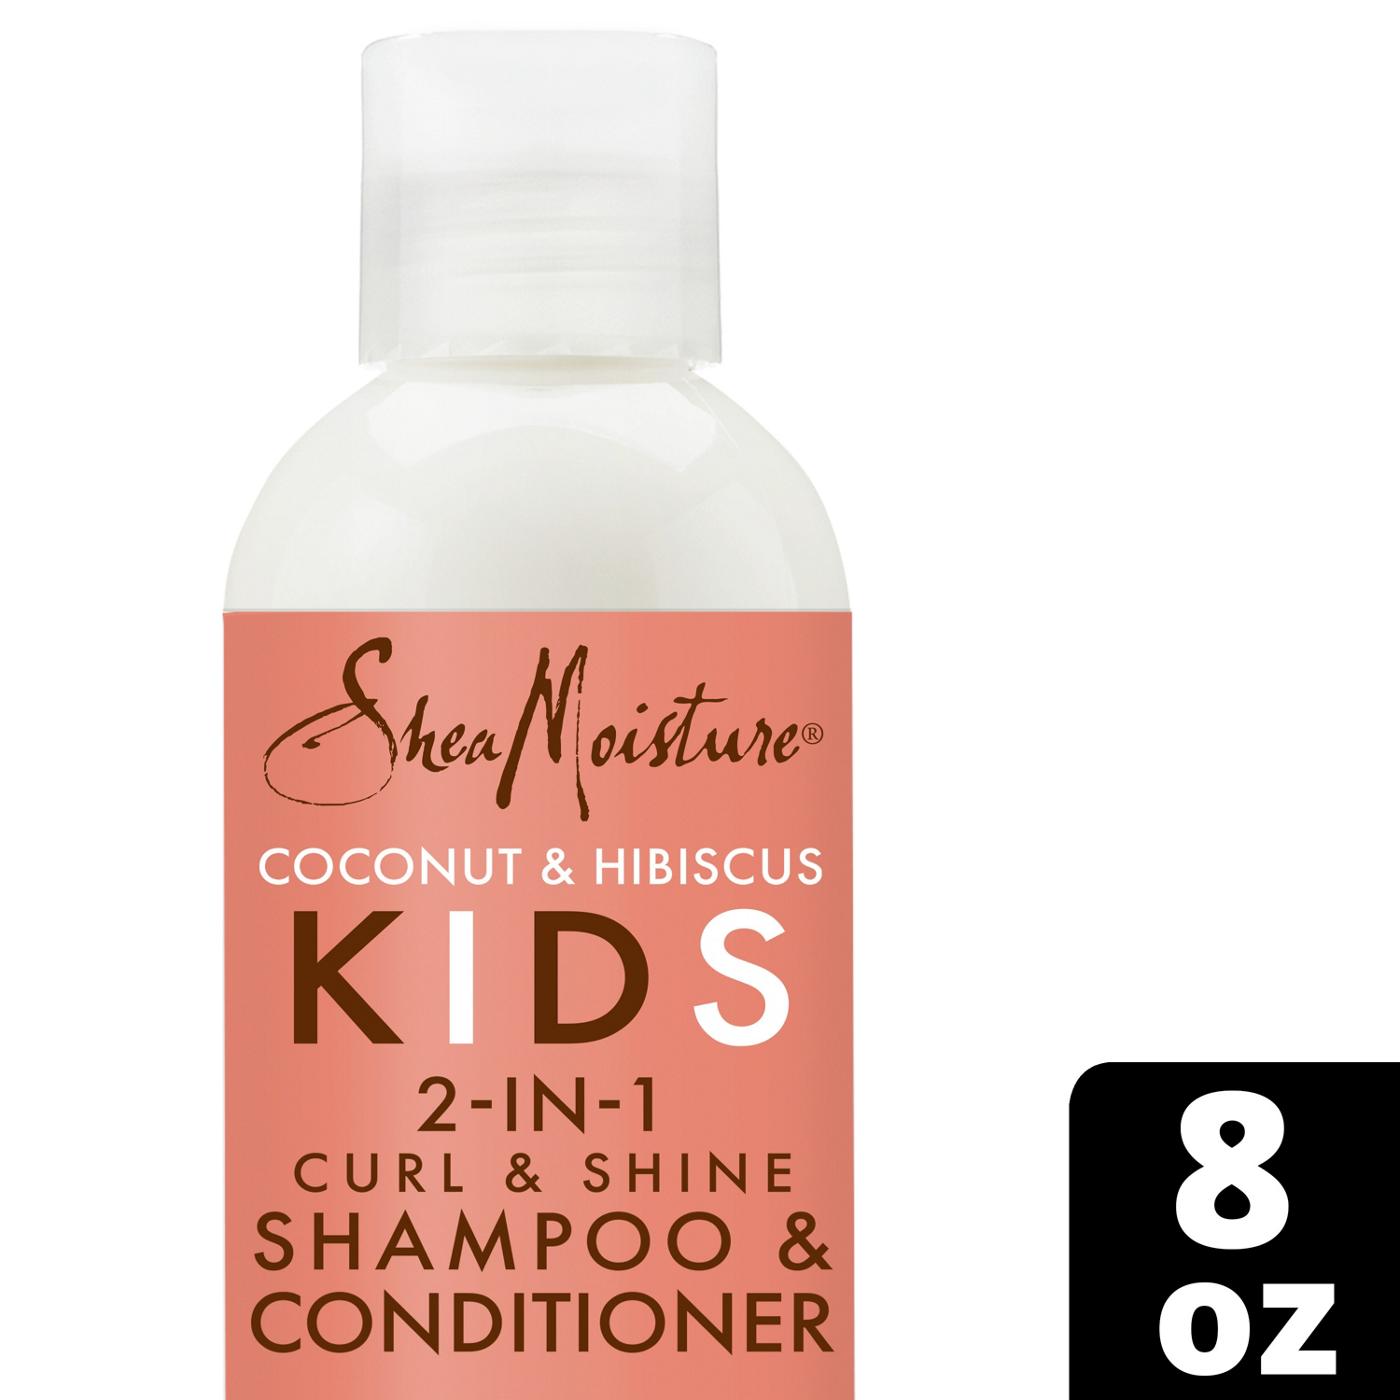 SheaMoisture 2-in-1 Kids Shampoo & Conditioner; image 6 of 8